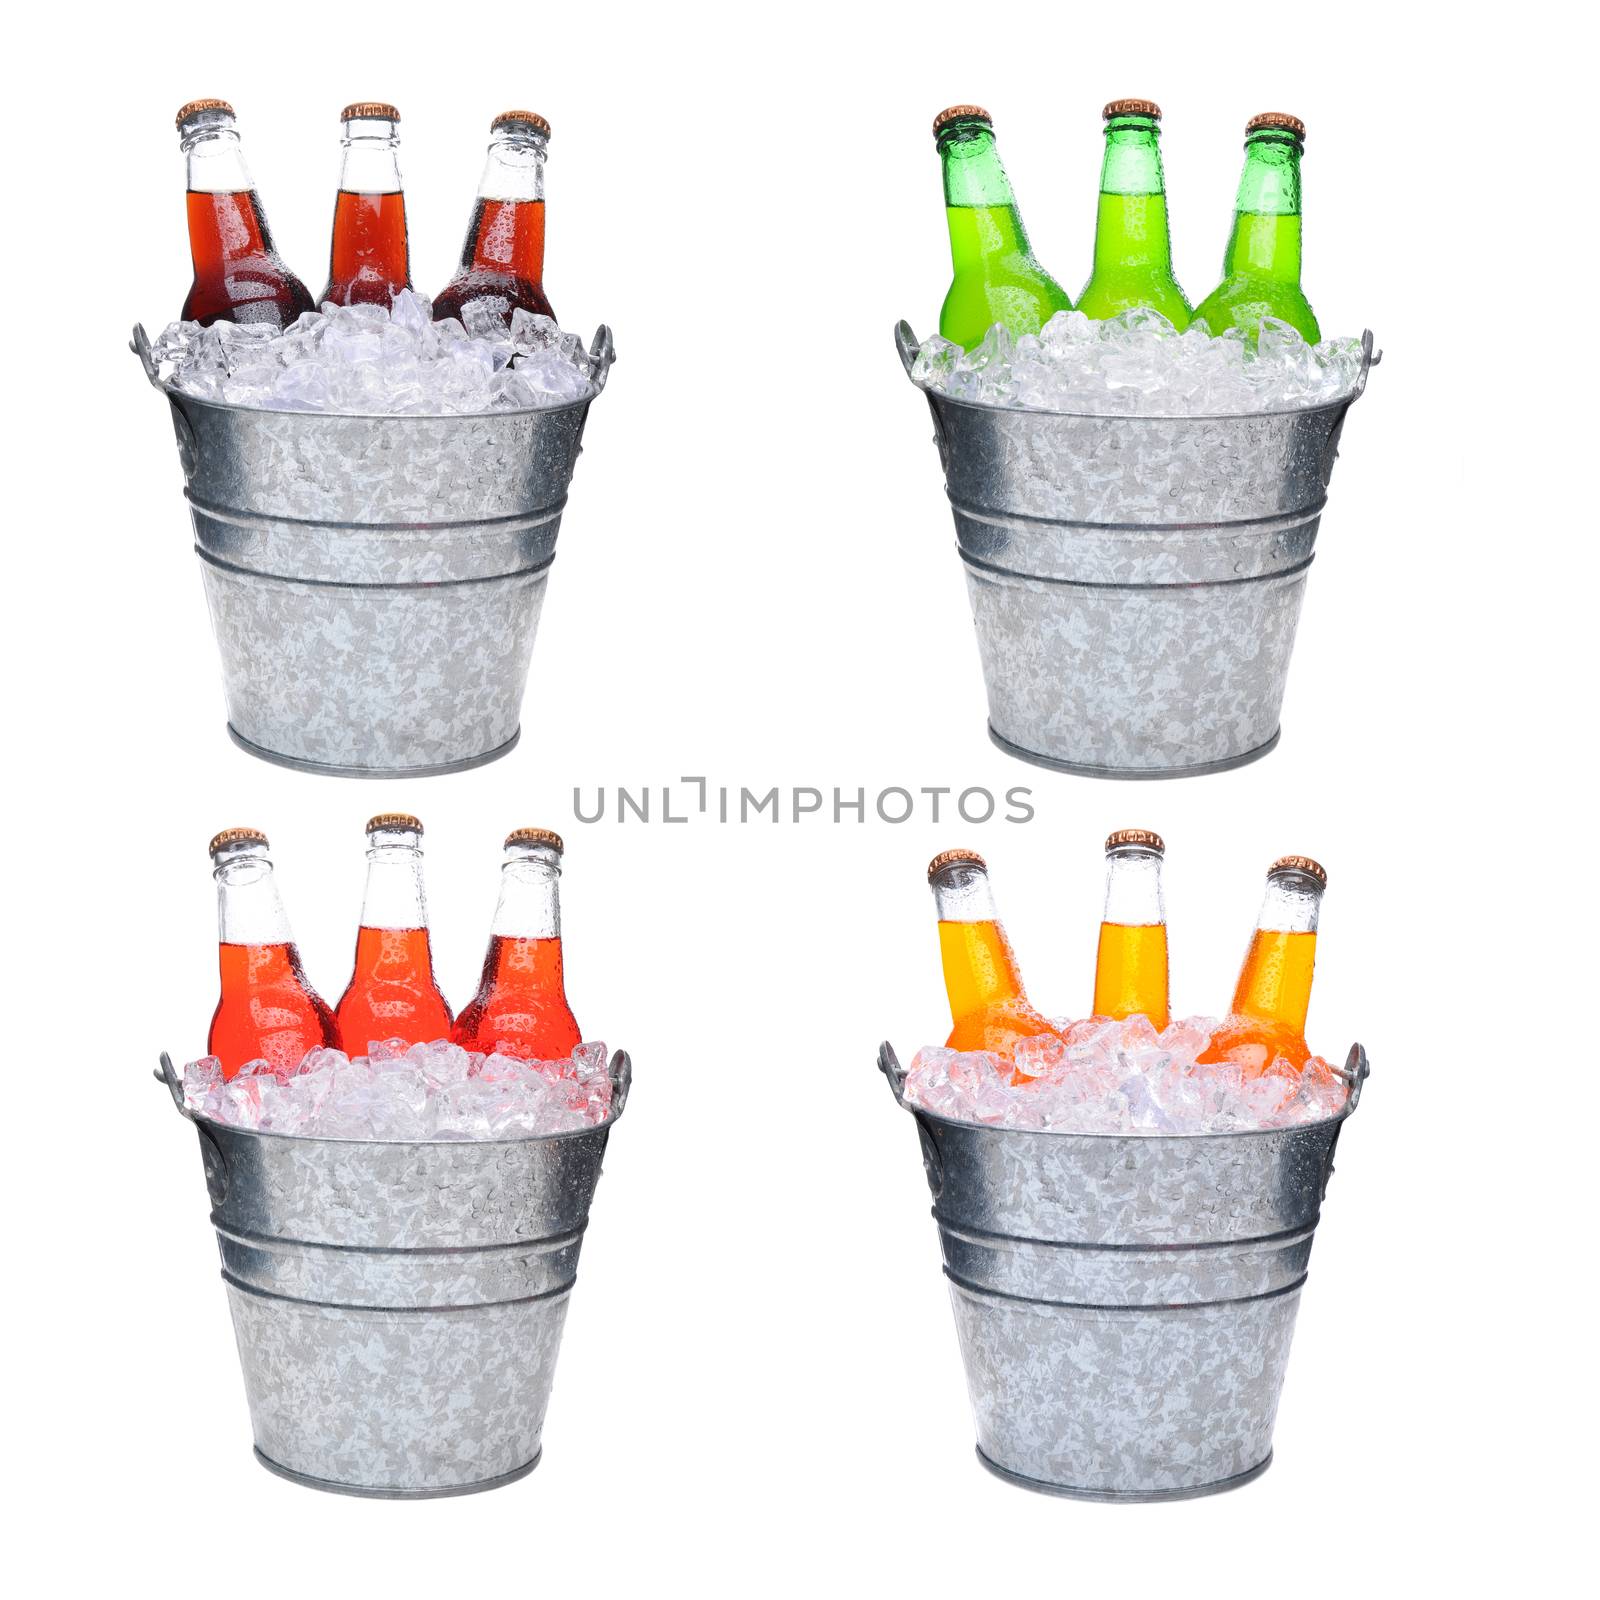 Four ice buckets filled with three soda bottles each by sCukrov